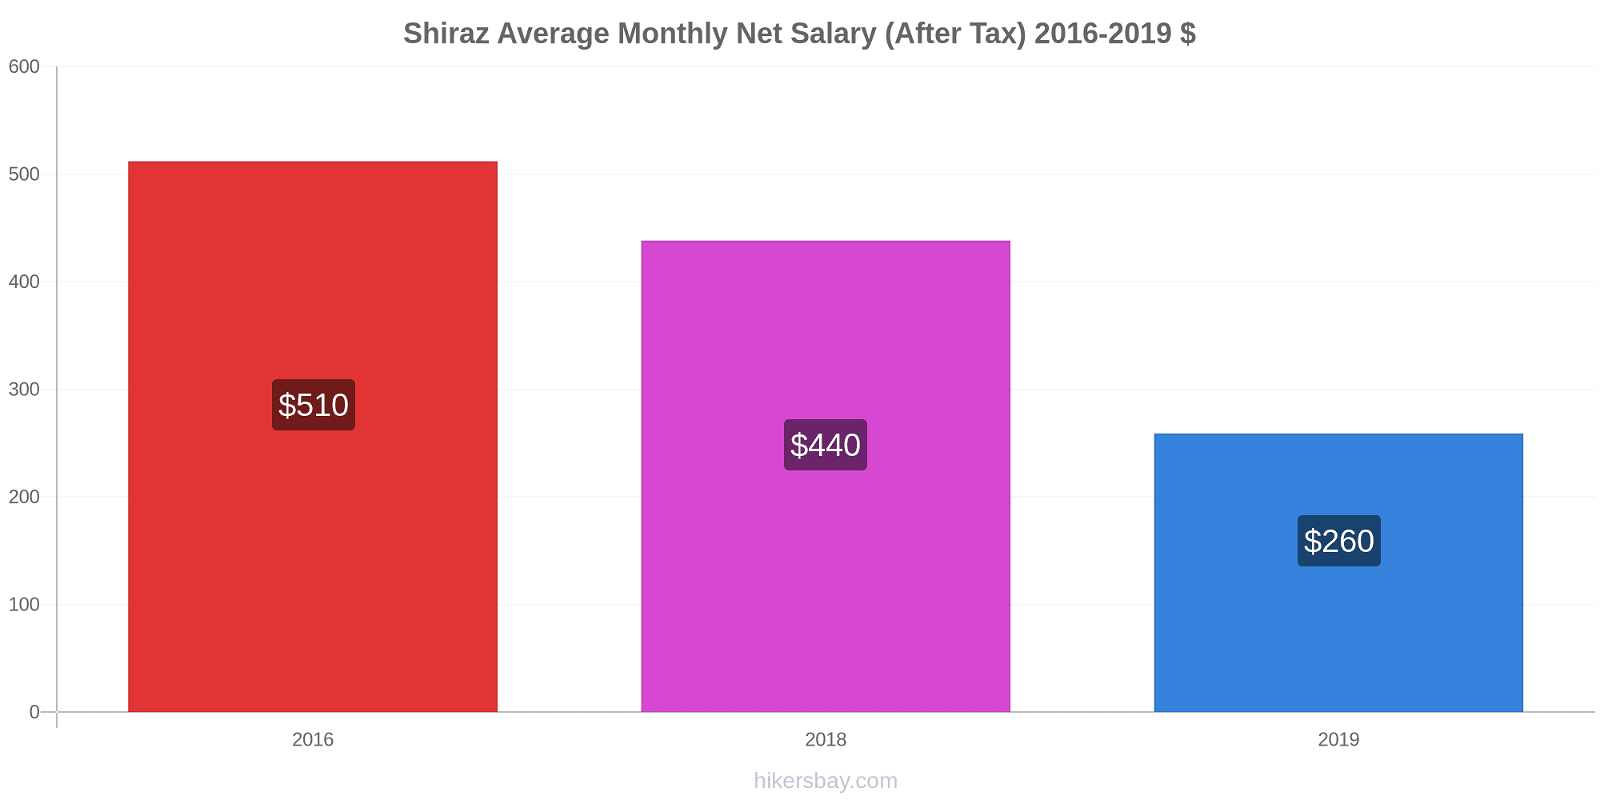 Shiraz price changes Average Monthly Net Salary (After Tax) hikersbay.com